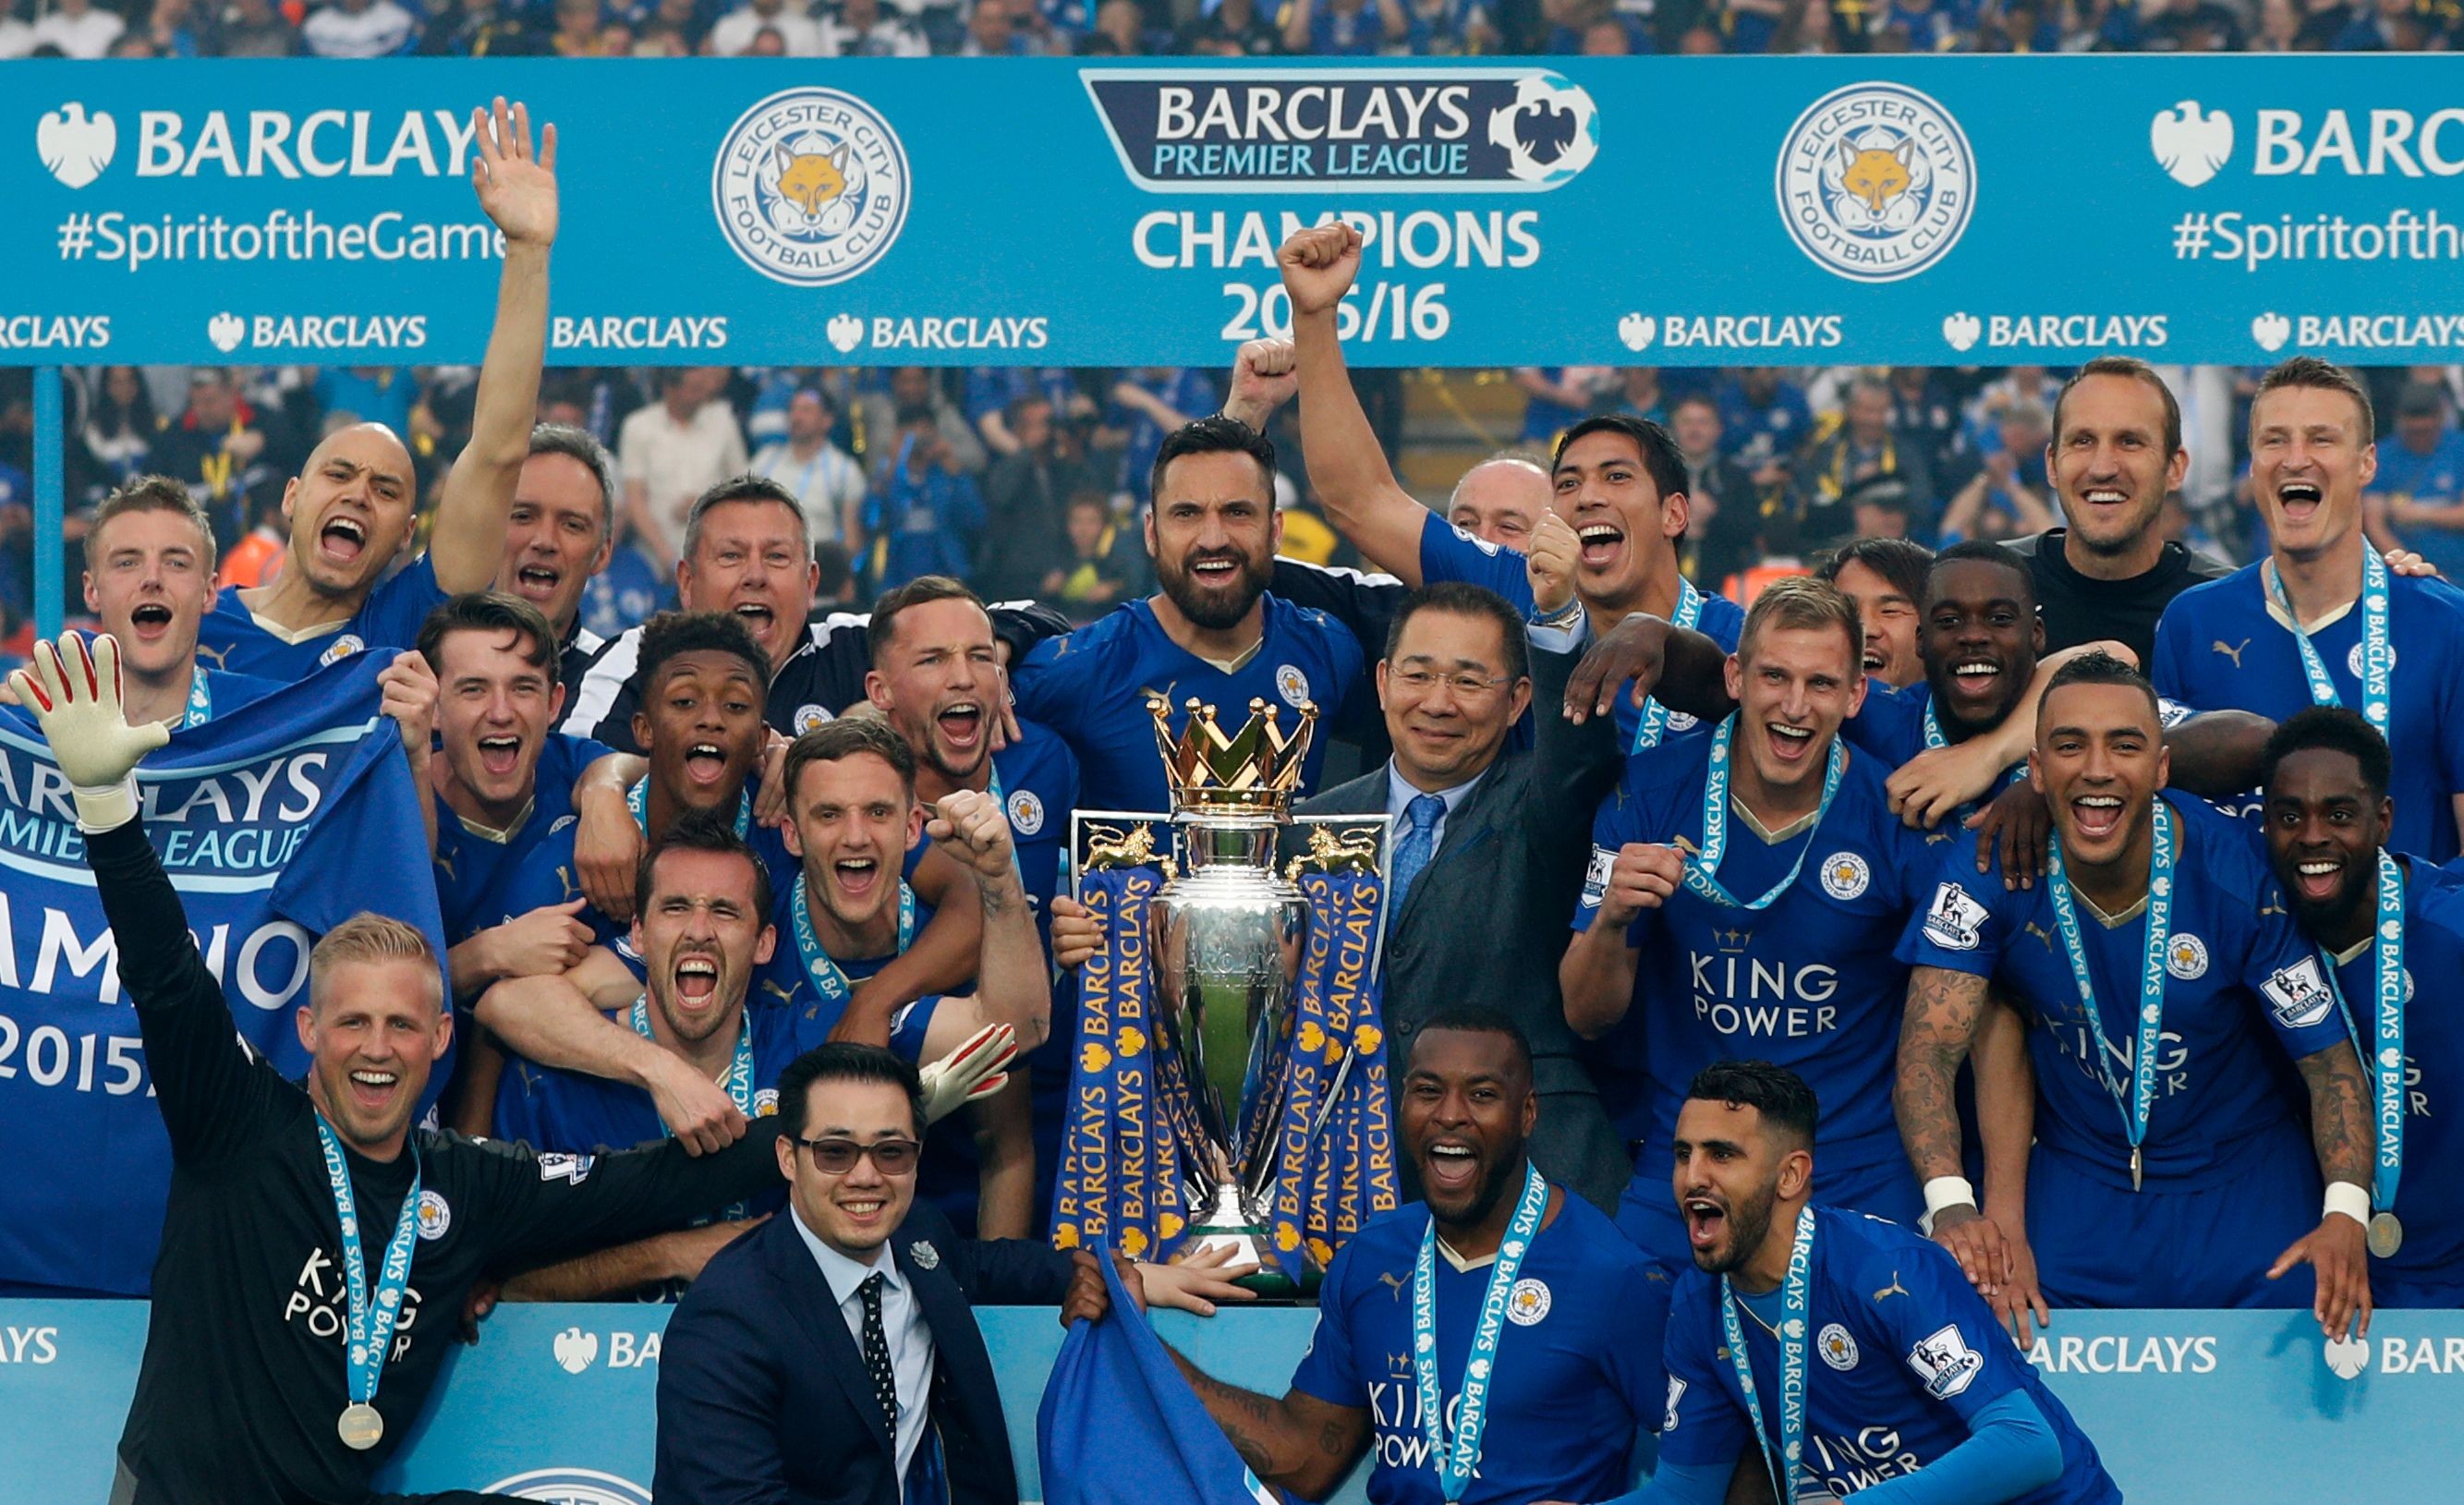 Leicester City players and chairman Vichai Srivaddhanaprabha (C) a pose with the Premier league trophy after winning the league. Photo: AFP